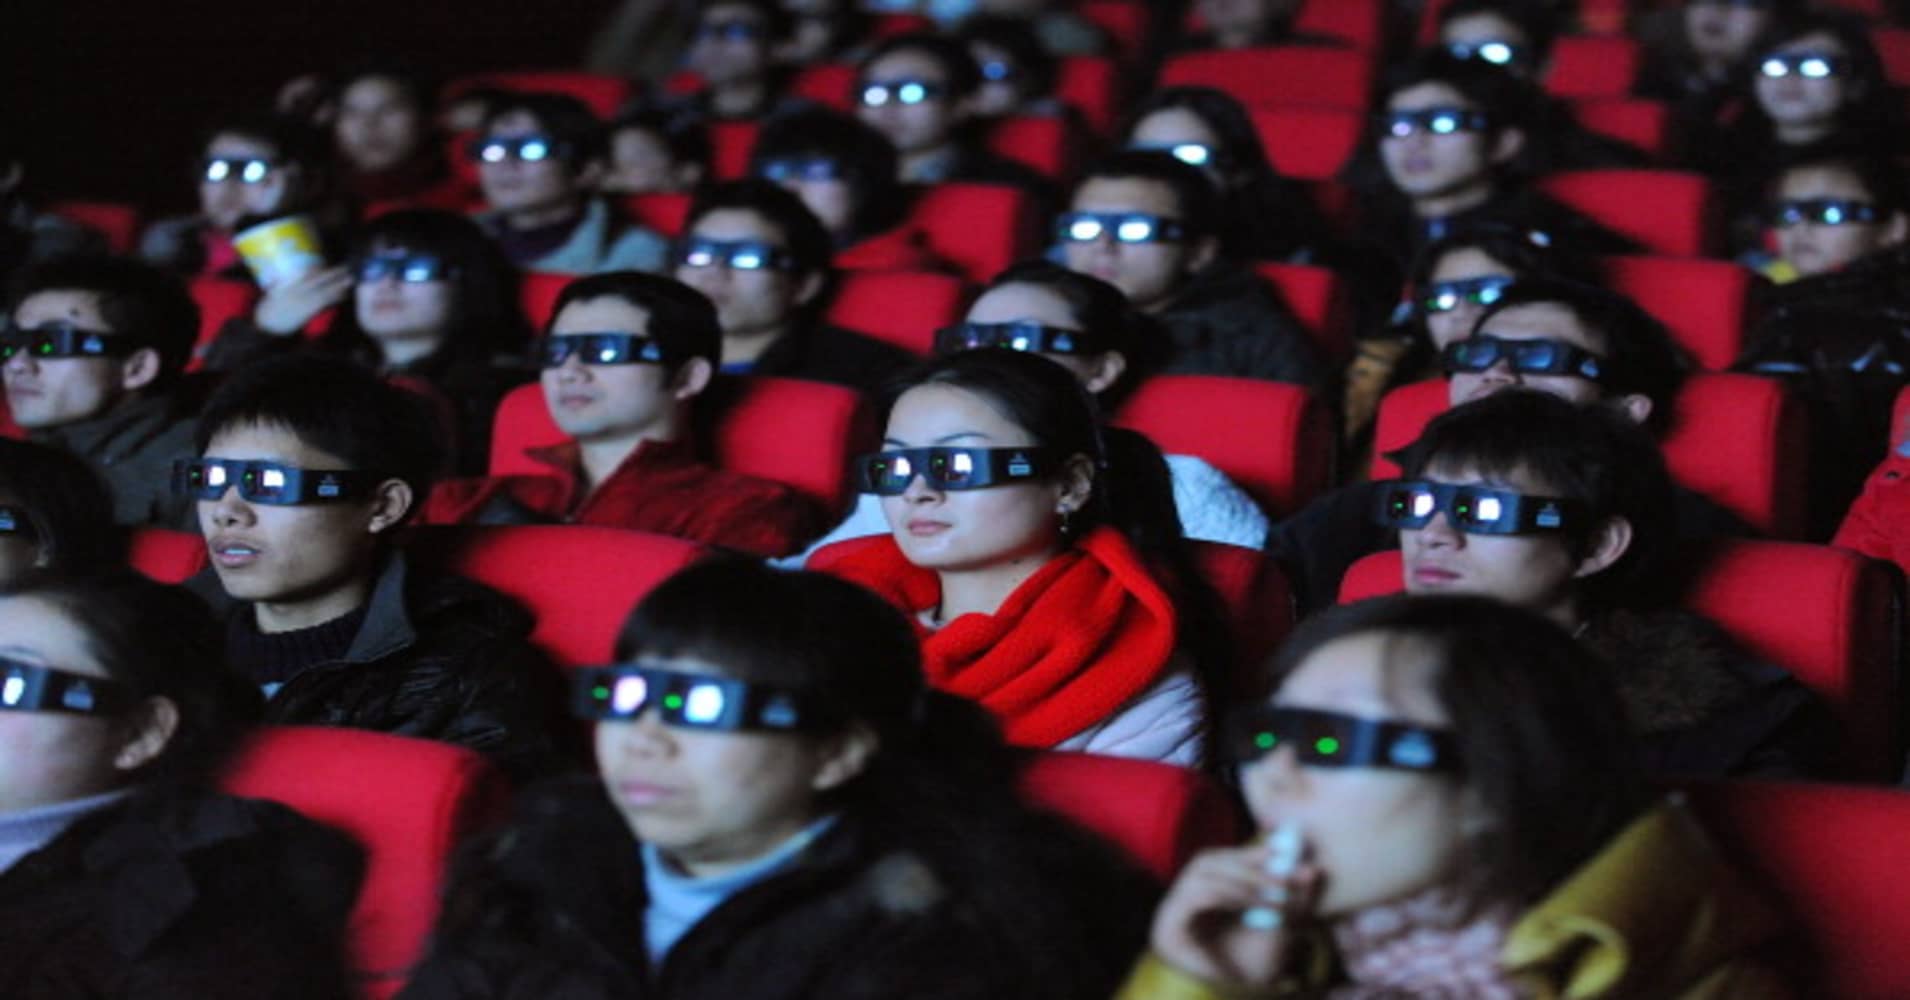 To Get Movies Into China, Hollywood Gives Censors a Preview